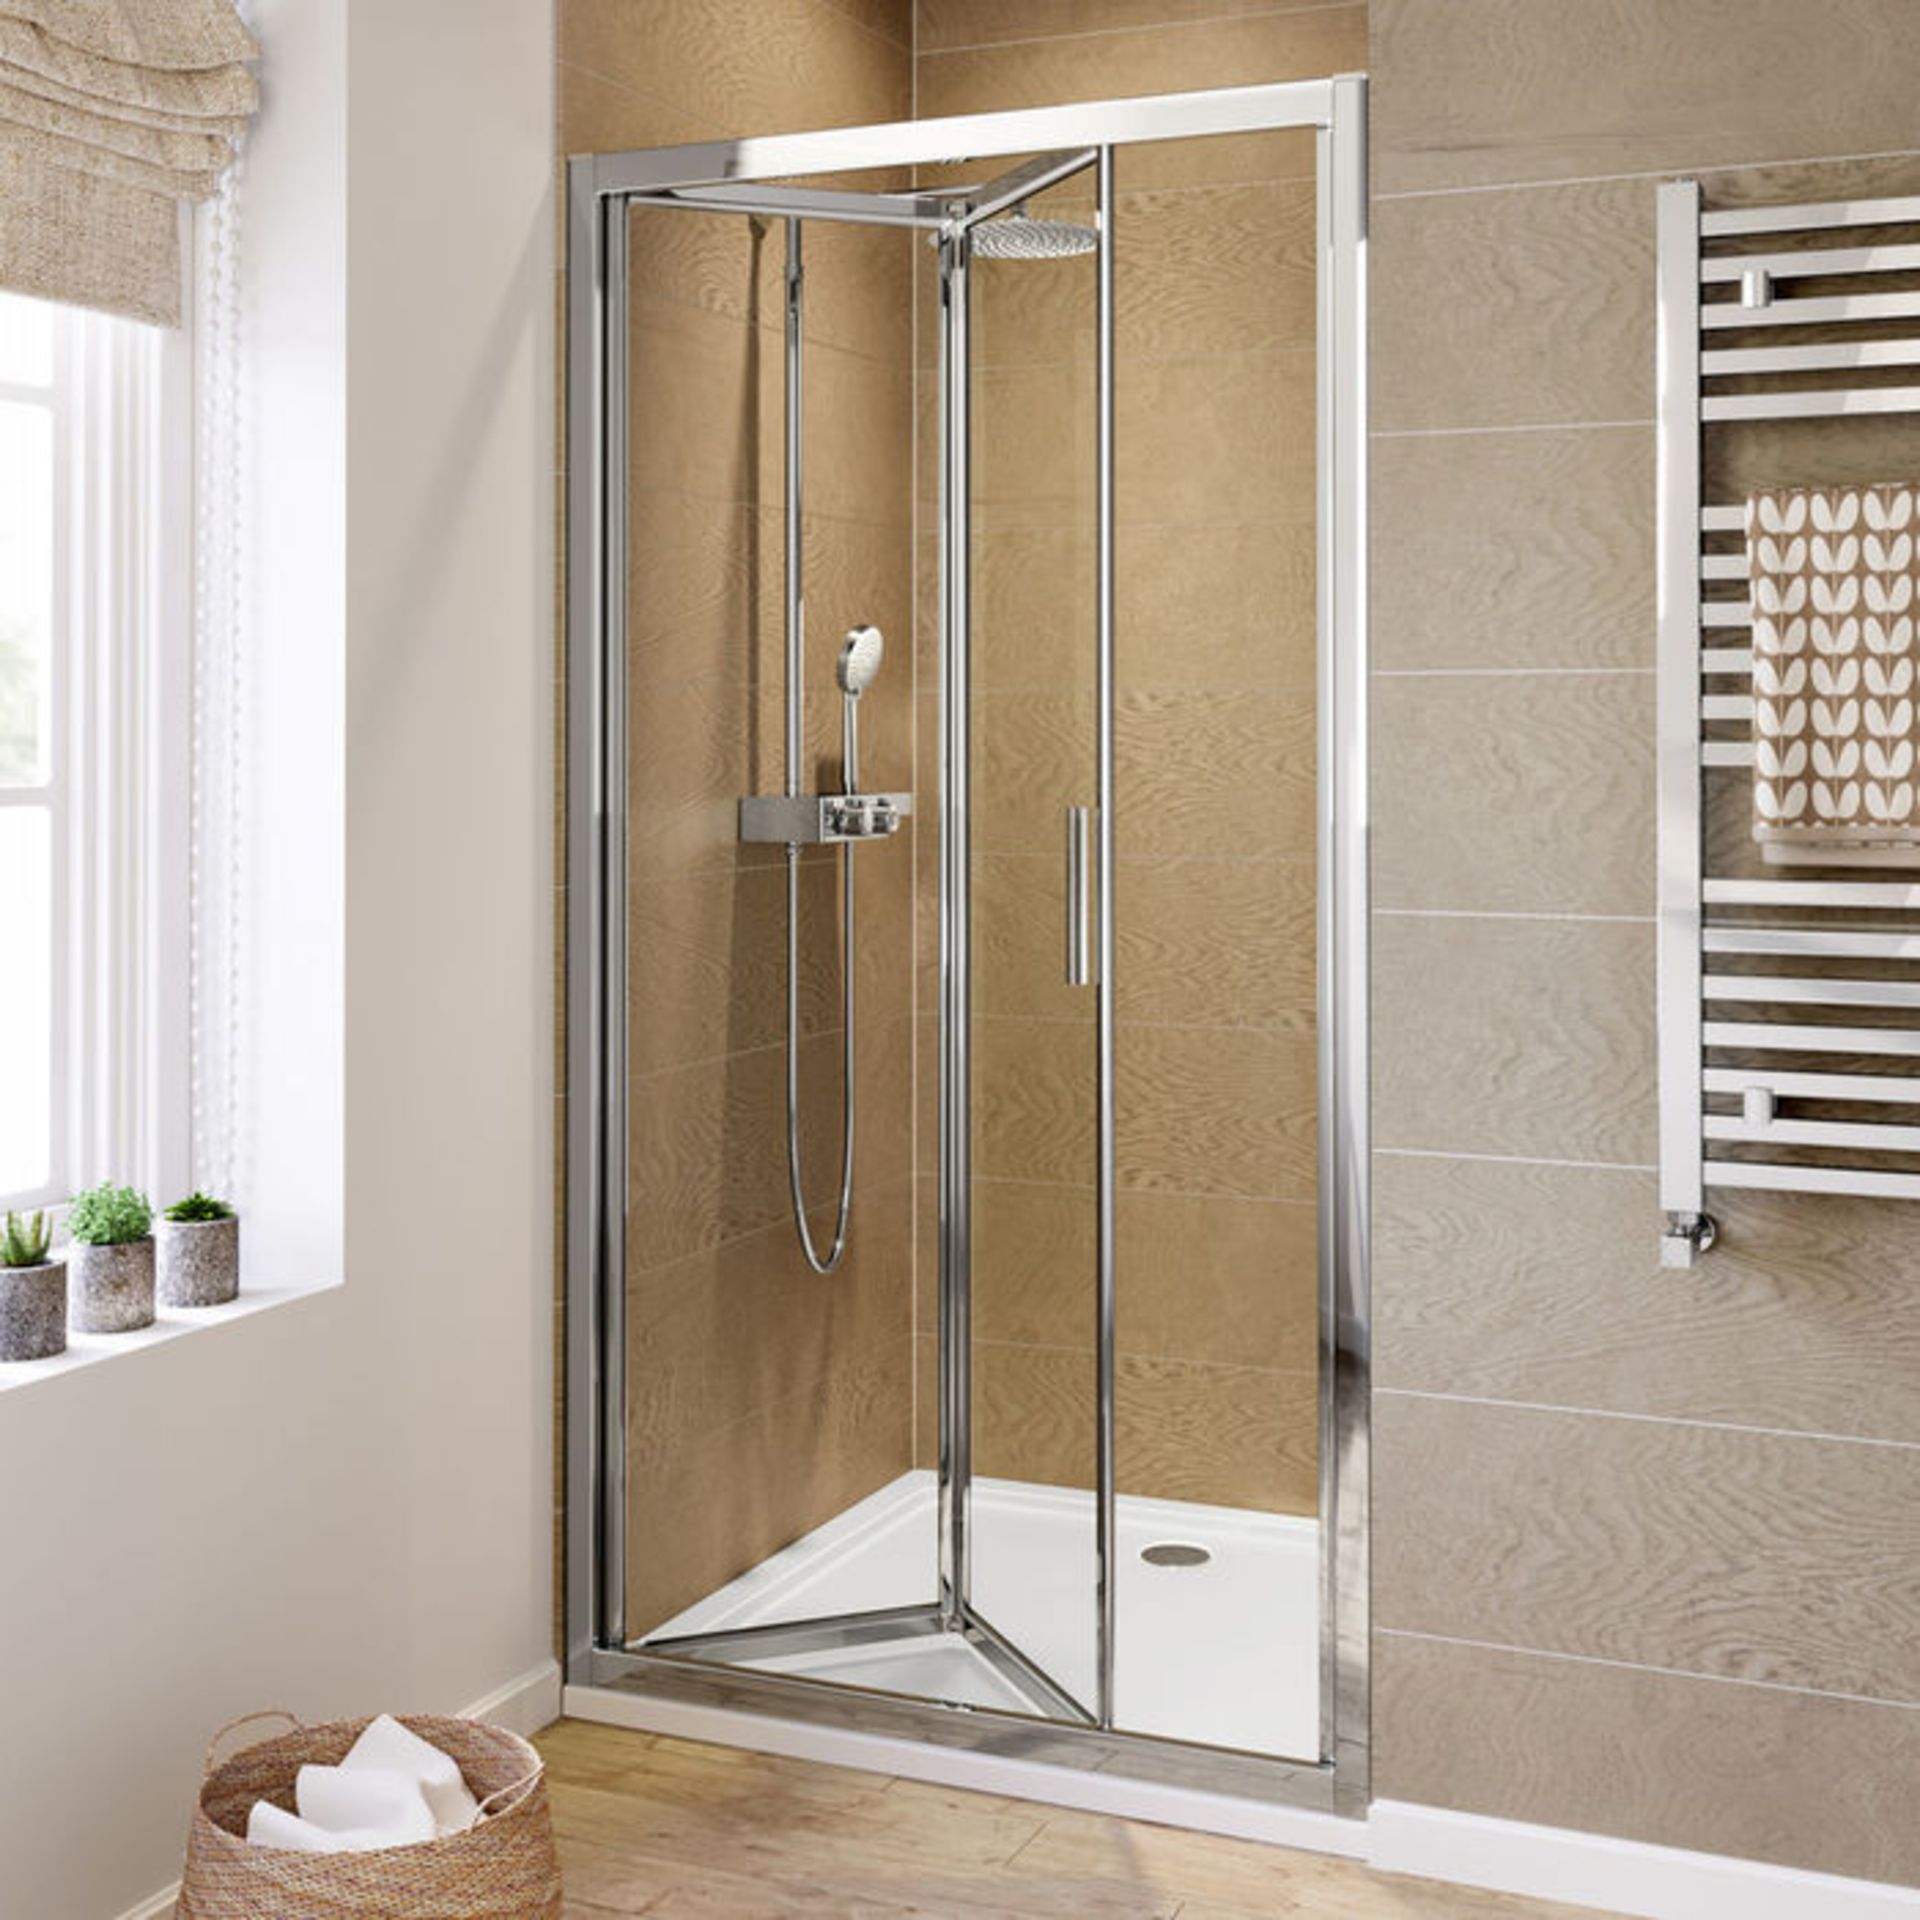 (GR31) 1000mm - 6mm - Elements EasyClean Bifold Shower Door 6mm Safety Glass - Single-sided - Image 2 of 5